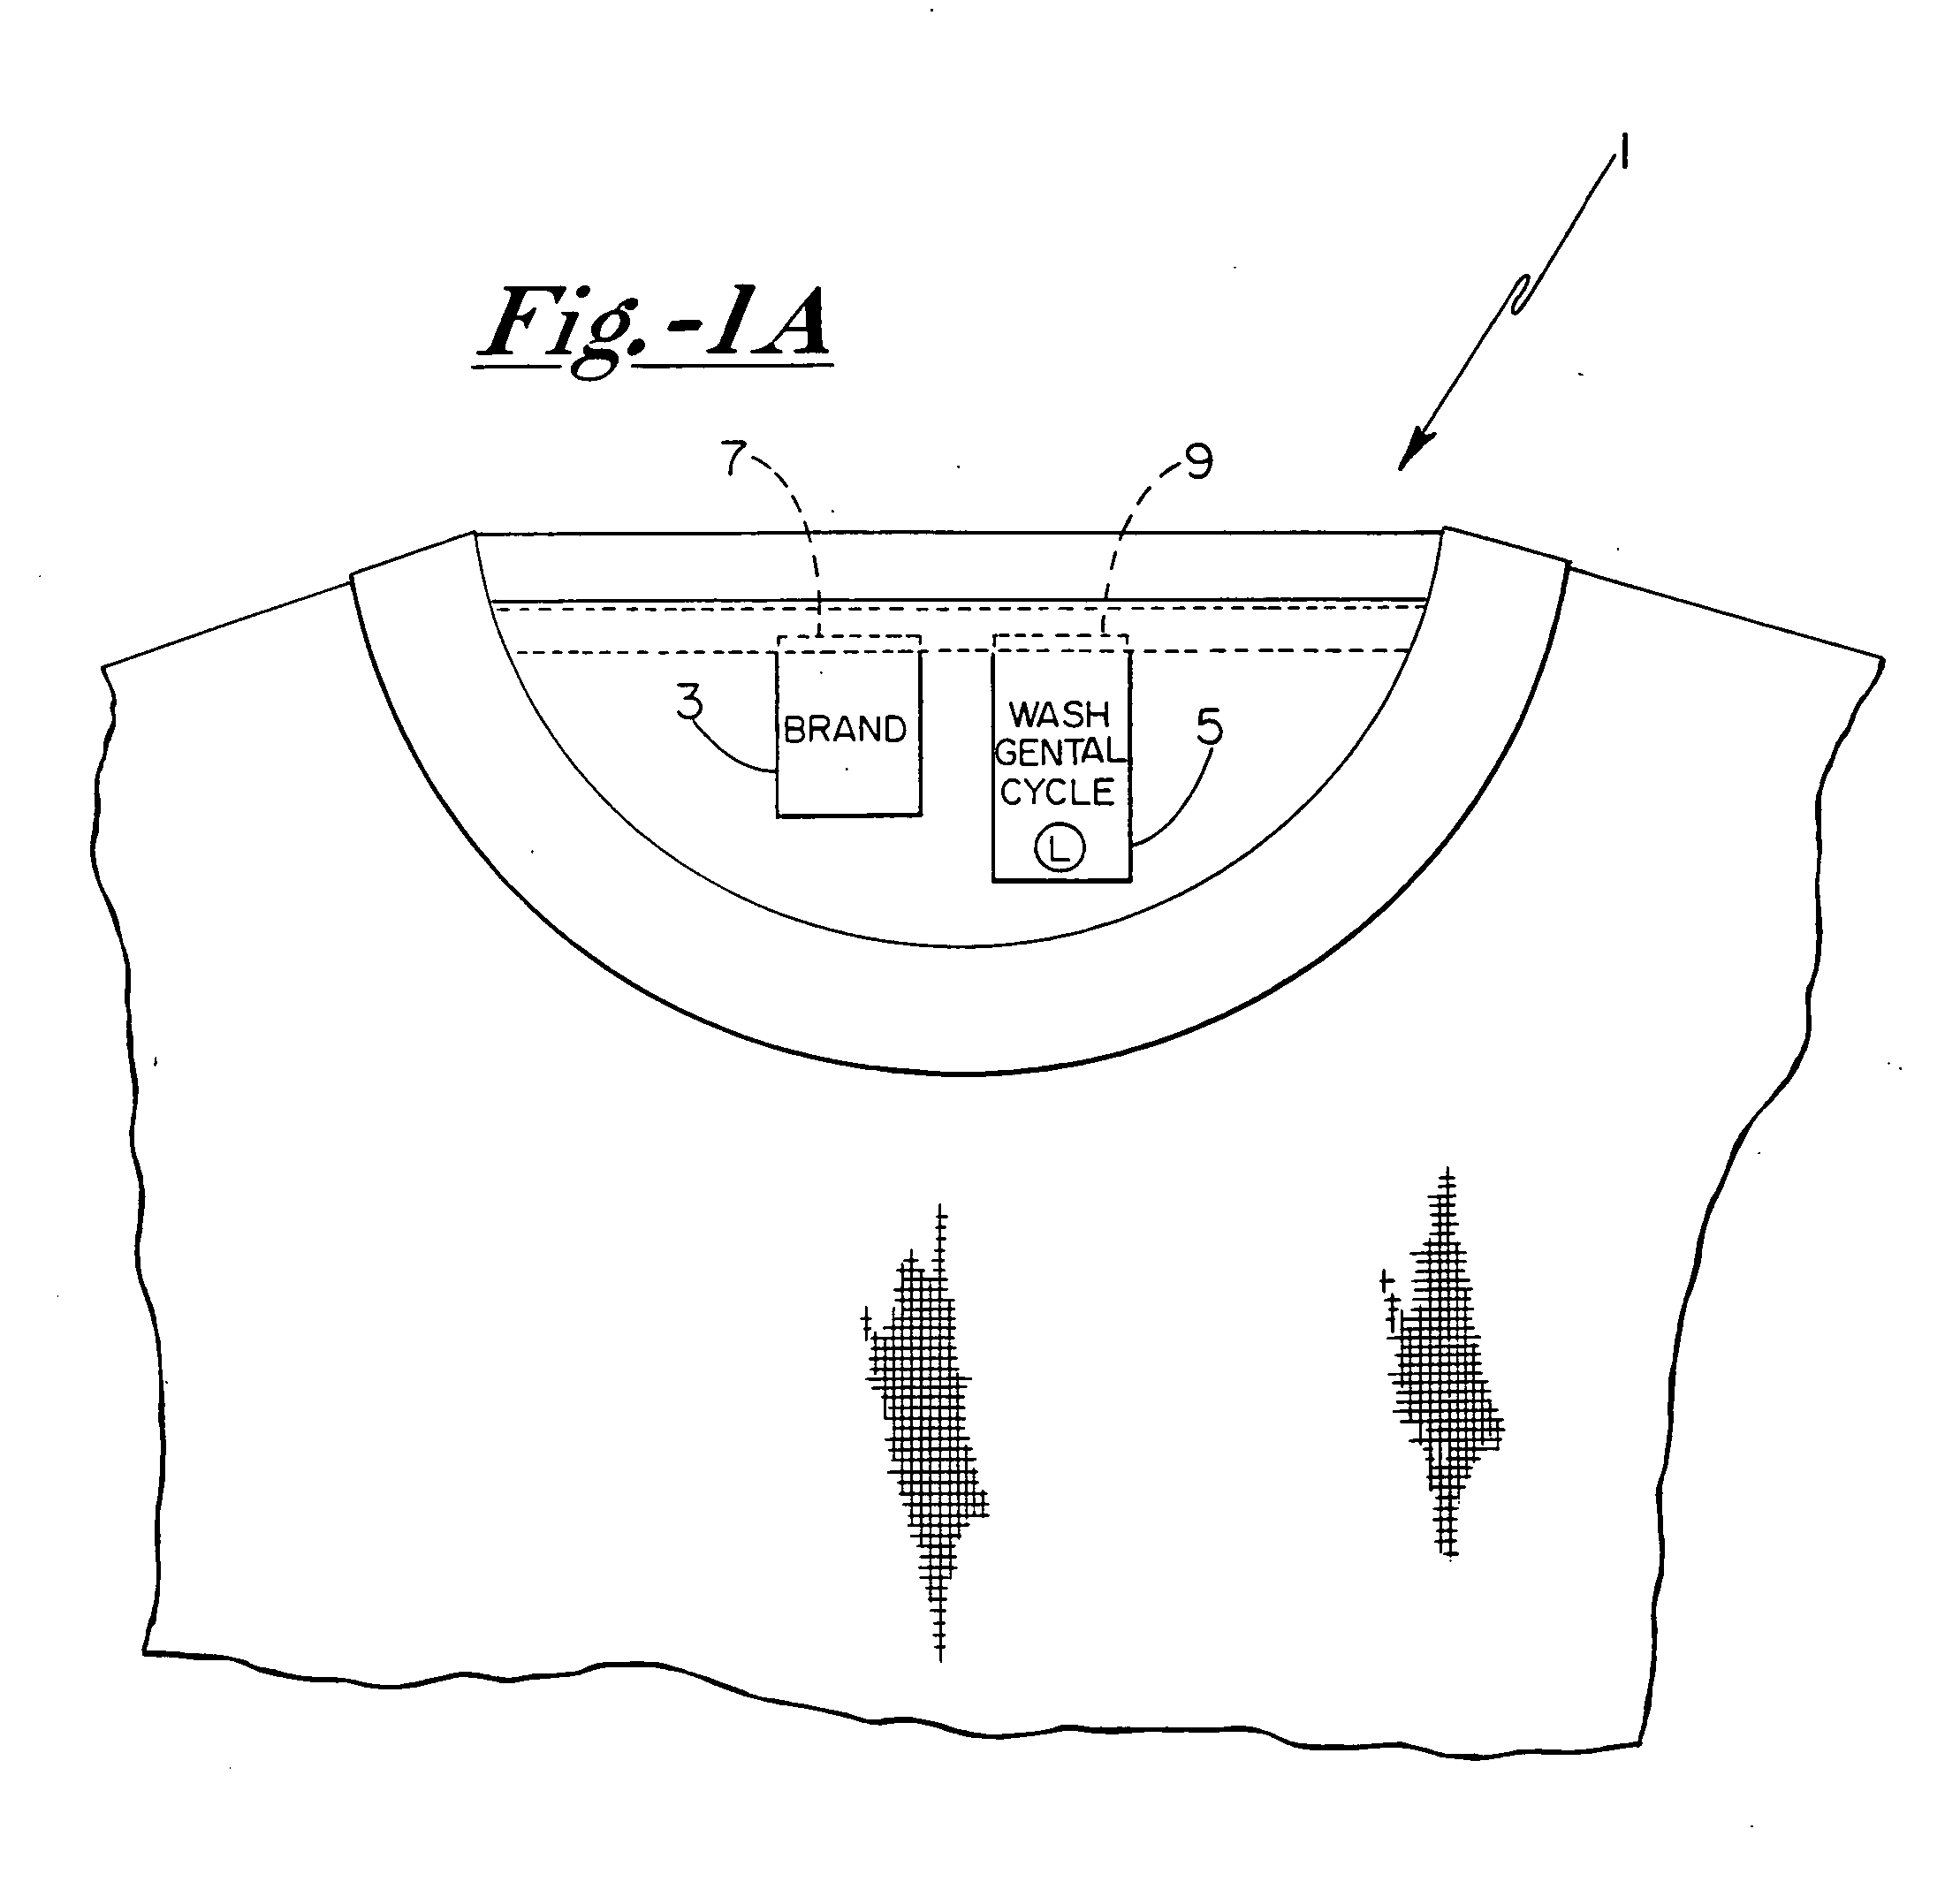 Method of private labeling a garment